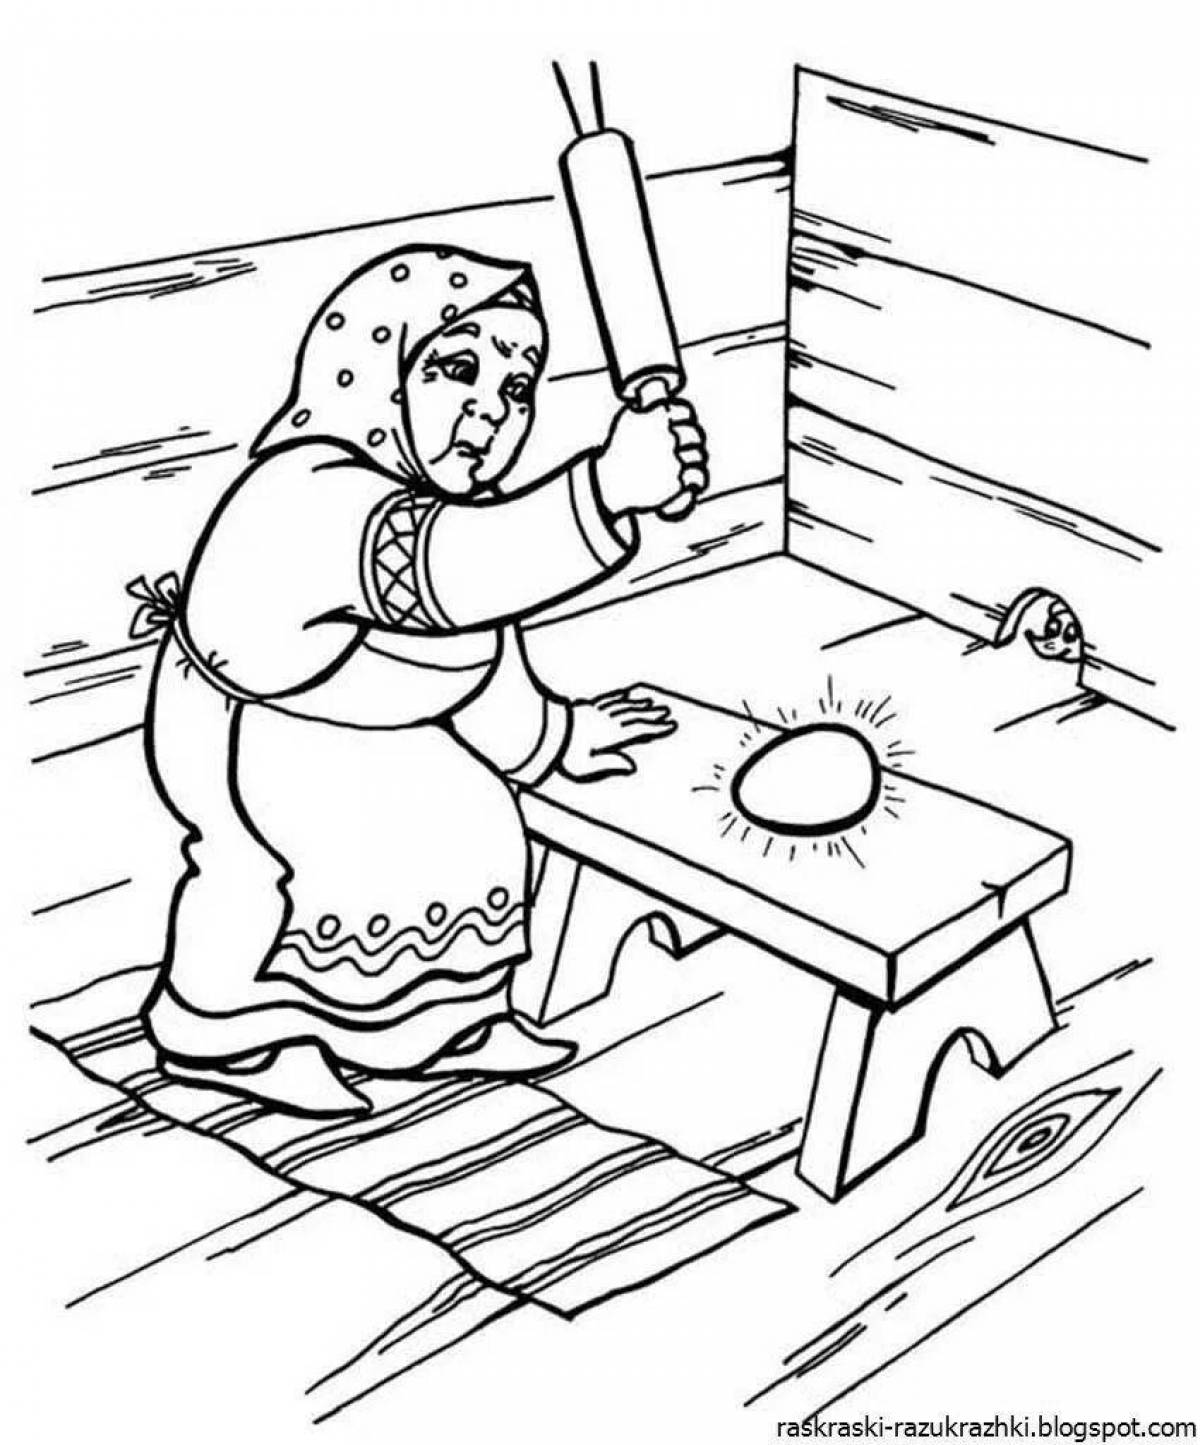 Chicken pockmarked coloring page for preschoolers